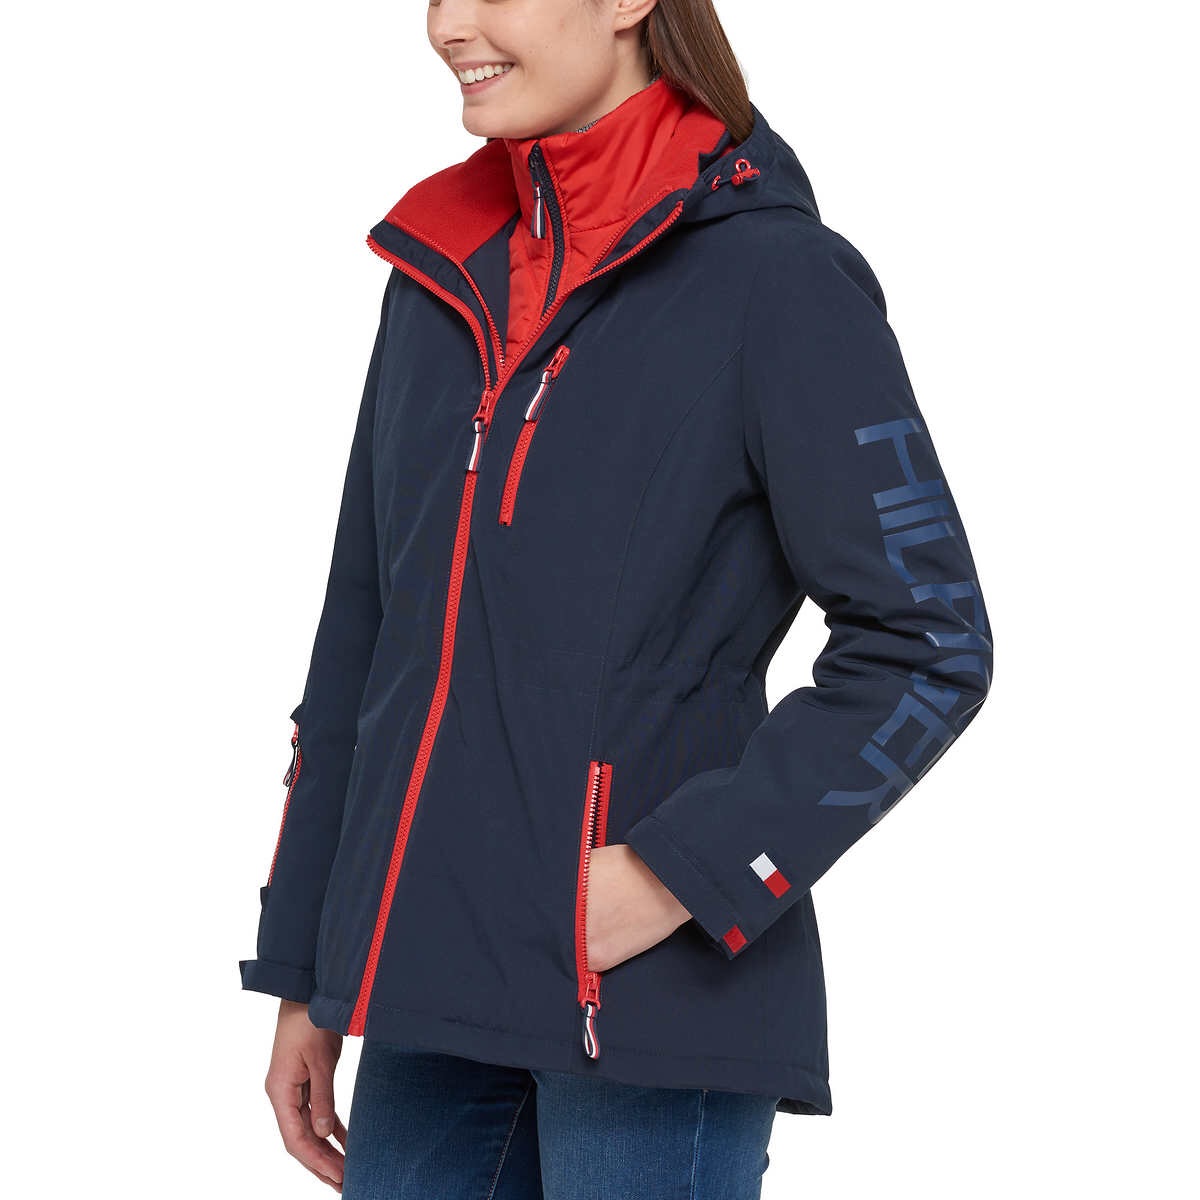 Tommy Hilfiger Ladies' 3-in-1 Systems Jacket冲锋衣